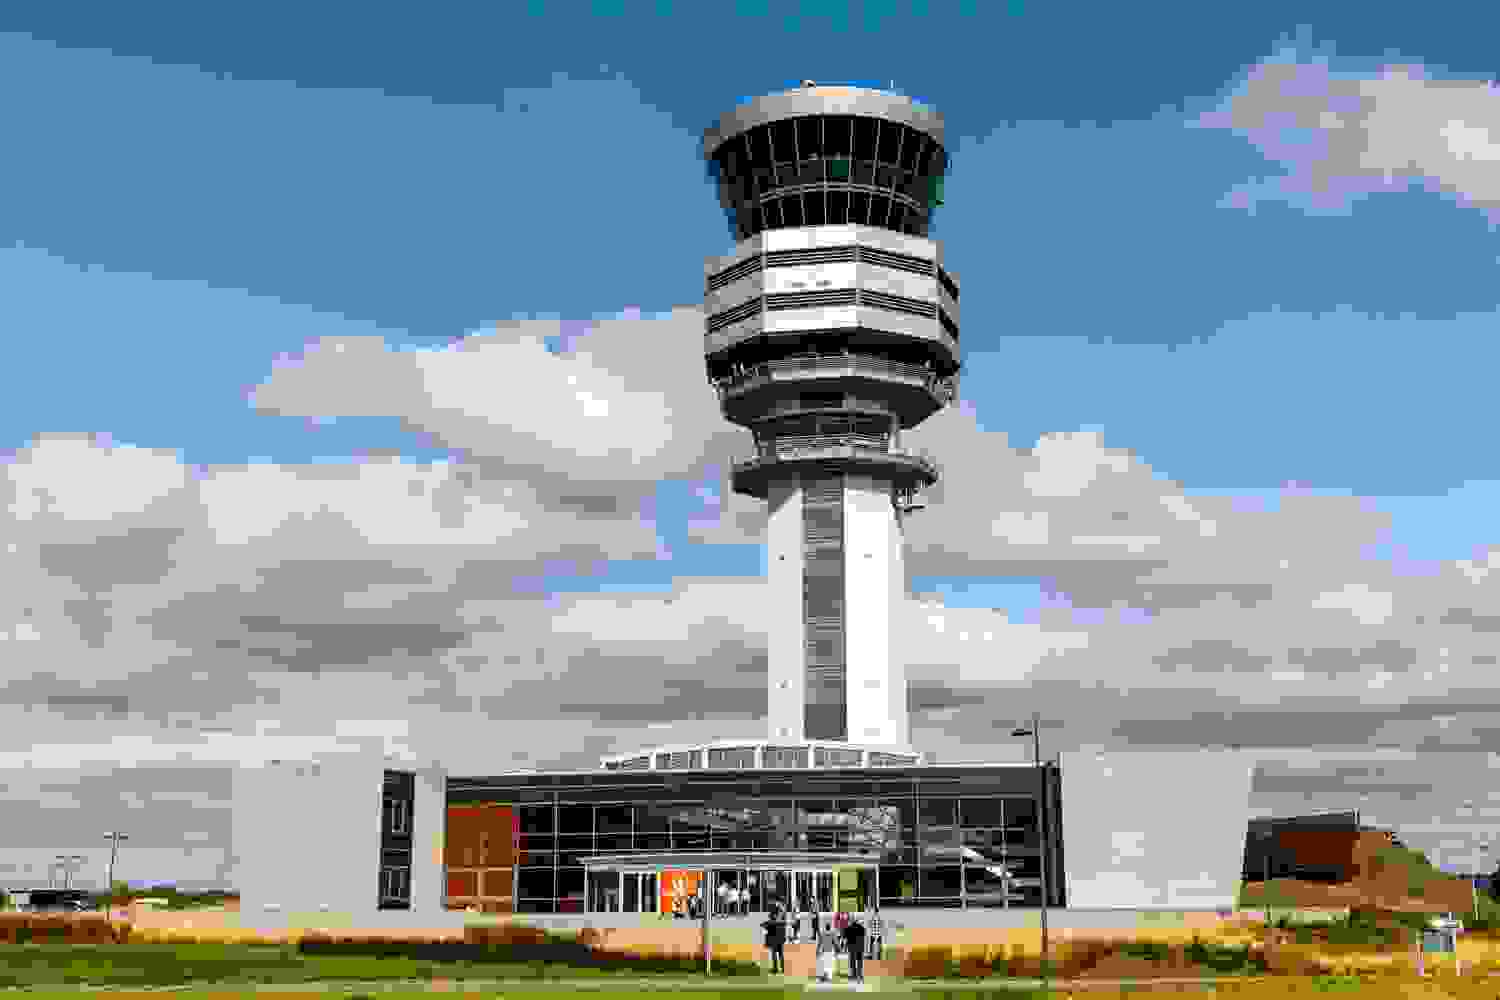 The Brussels Airport control tower